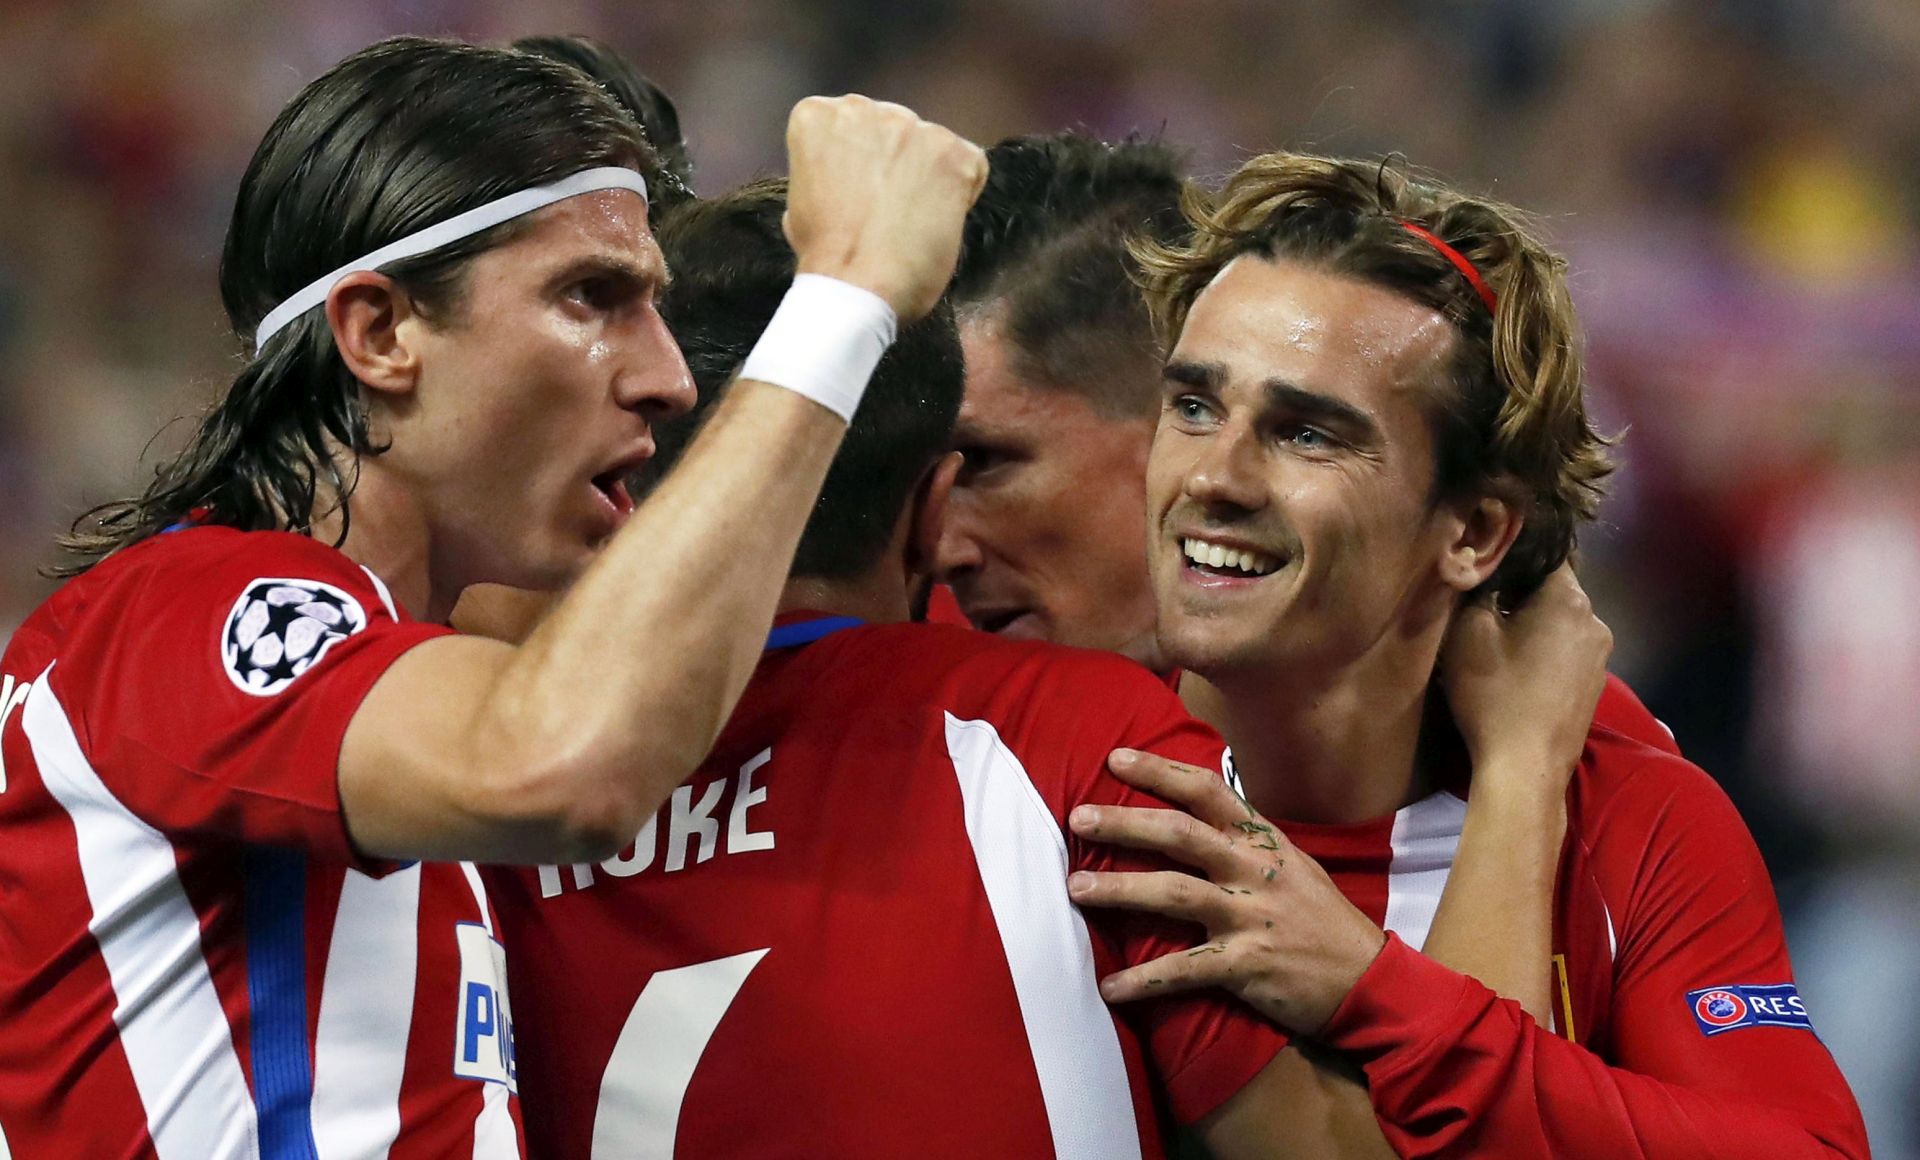 epaselect epa05905155 Atletico Madrid's striker Antoine Griezmann (R) celebrates scoring the first goal with his teammates during the UEFA Champions League quarterfinal first leg match between Atletico Madrid and Leicester City at the Vicente Calderon stadium in Madrid, Spain, 12 April 2017.  EPA/CHEMA MOYA